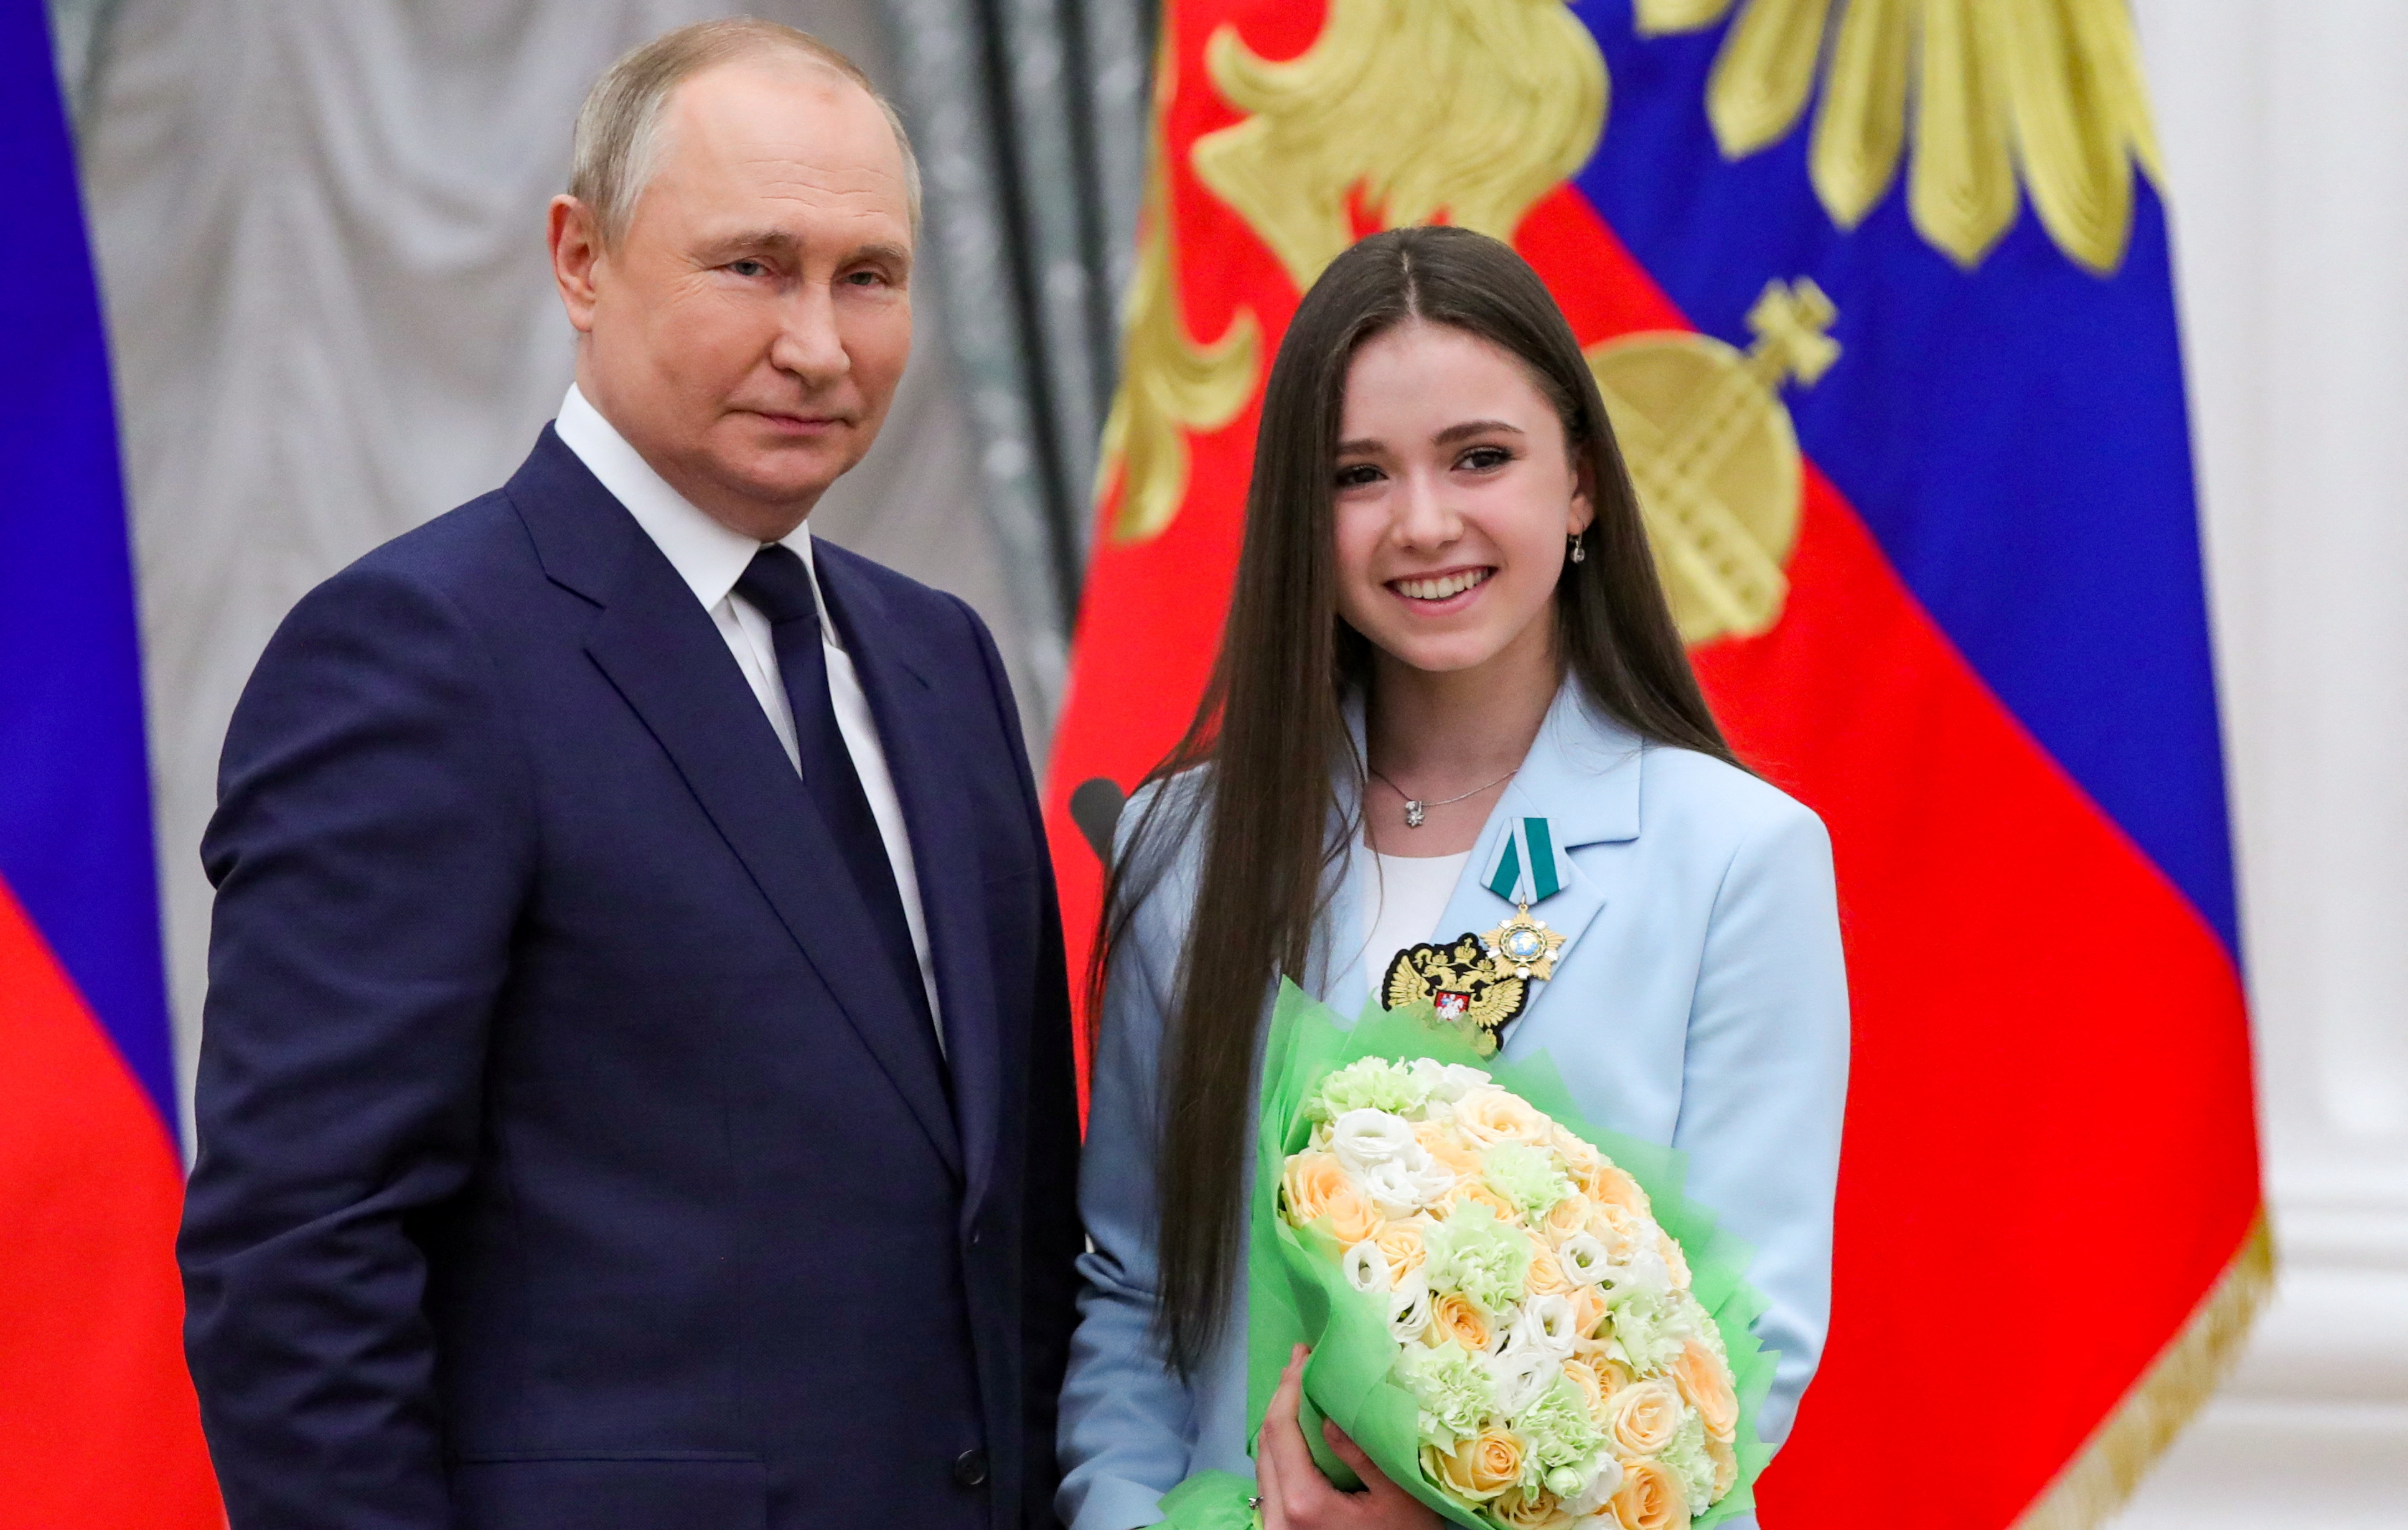 Russian President Vladimir Putin poses for a picture with figure skater Kamila Valieva during an awarding ceremony honouring the country's Olympians at the Kremlin in Moscow, Russia April 26, 2022. Sputnik/Mikhail Klimentyev/Kremlin via REUTERS ATTENTION EDITORS - THIS IMAGE WAS PROVIDED BY A THIRD PARTY.